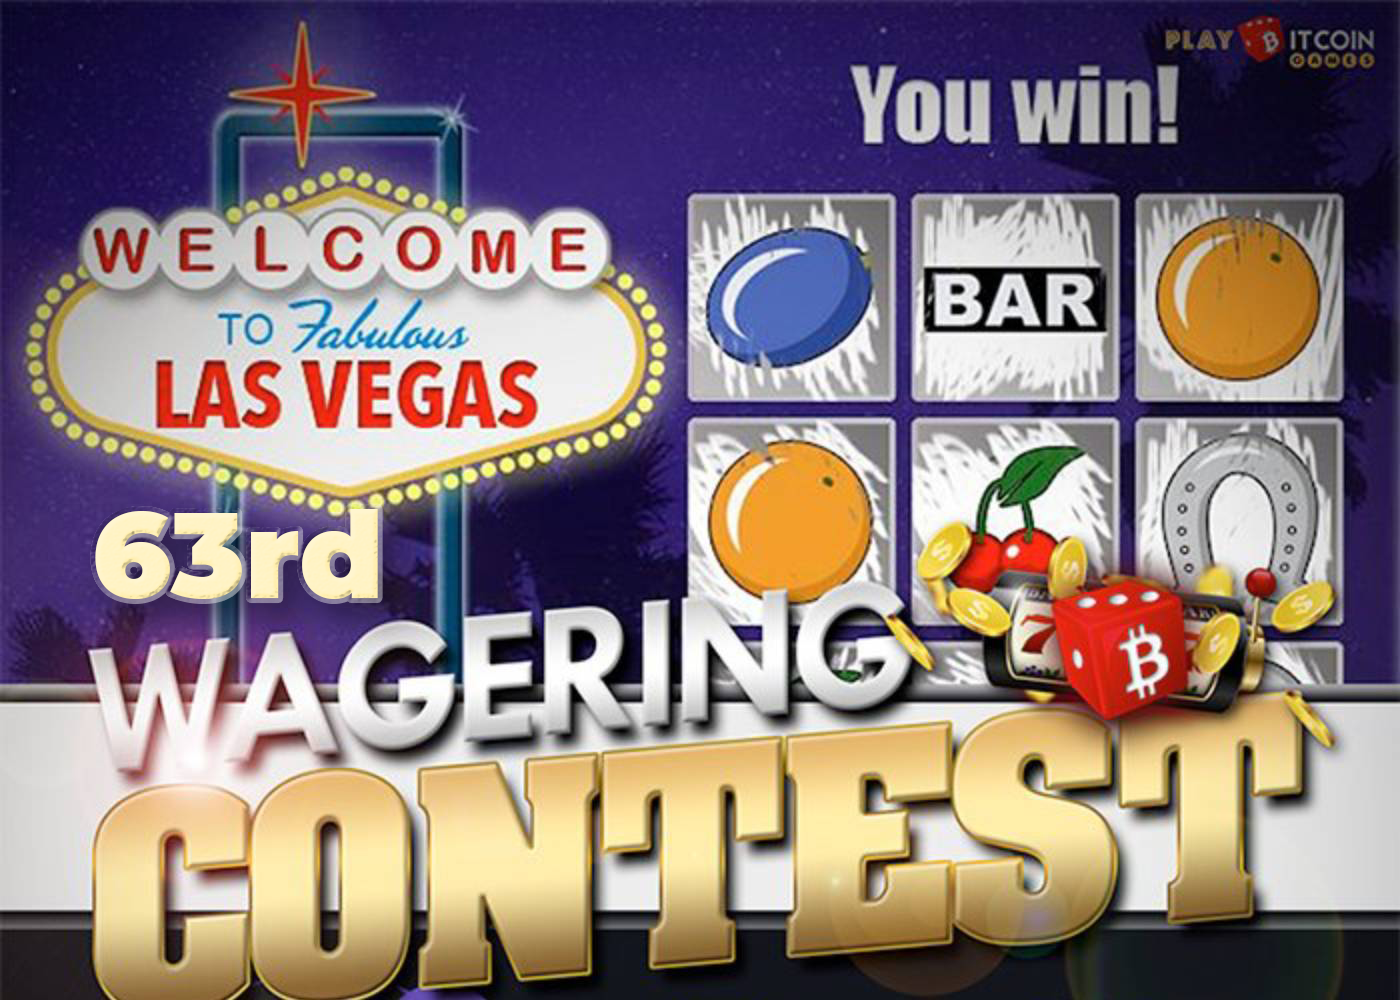 63rd wagering competition - playbitcoingames.com